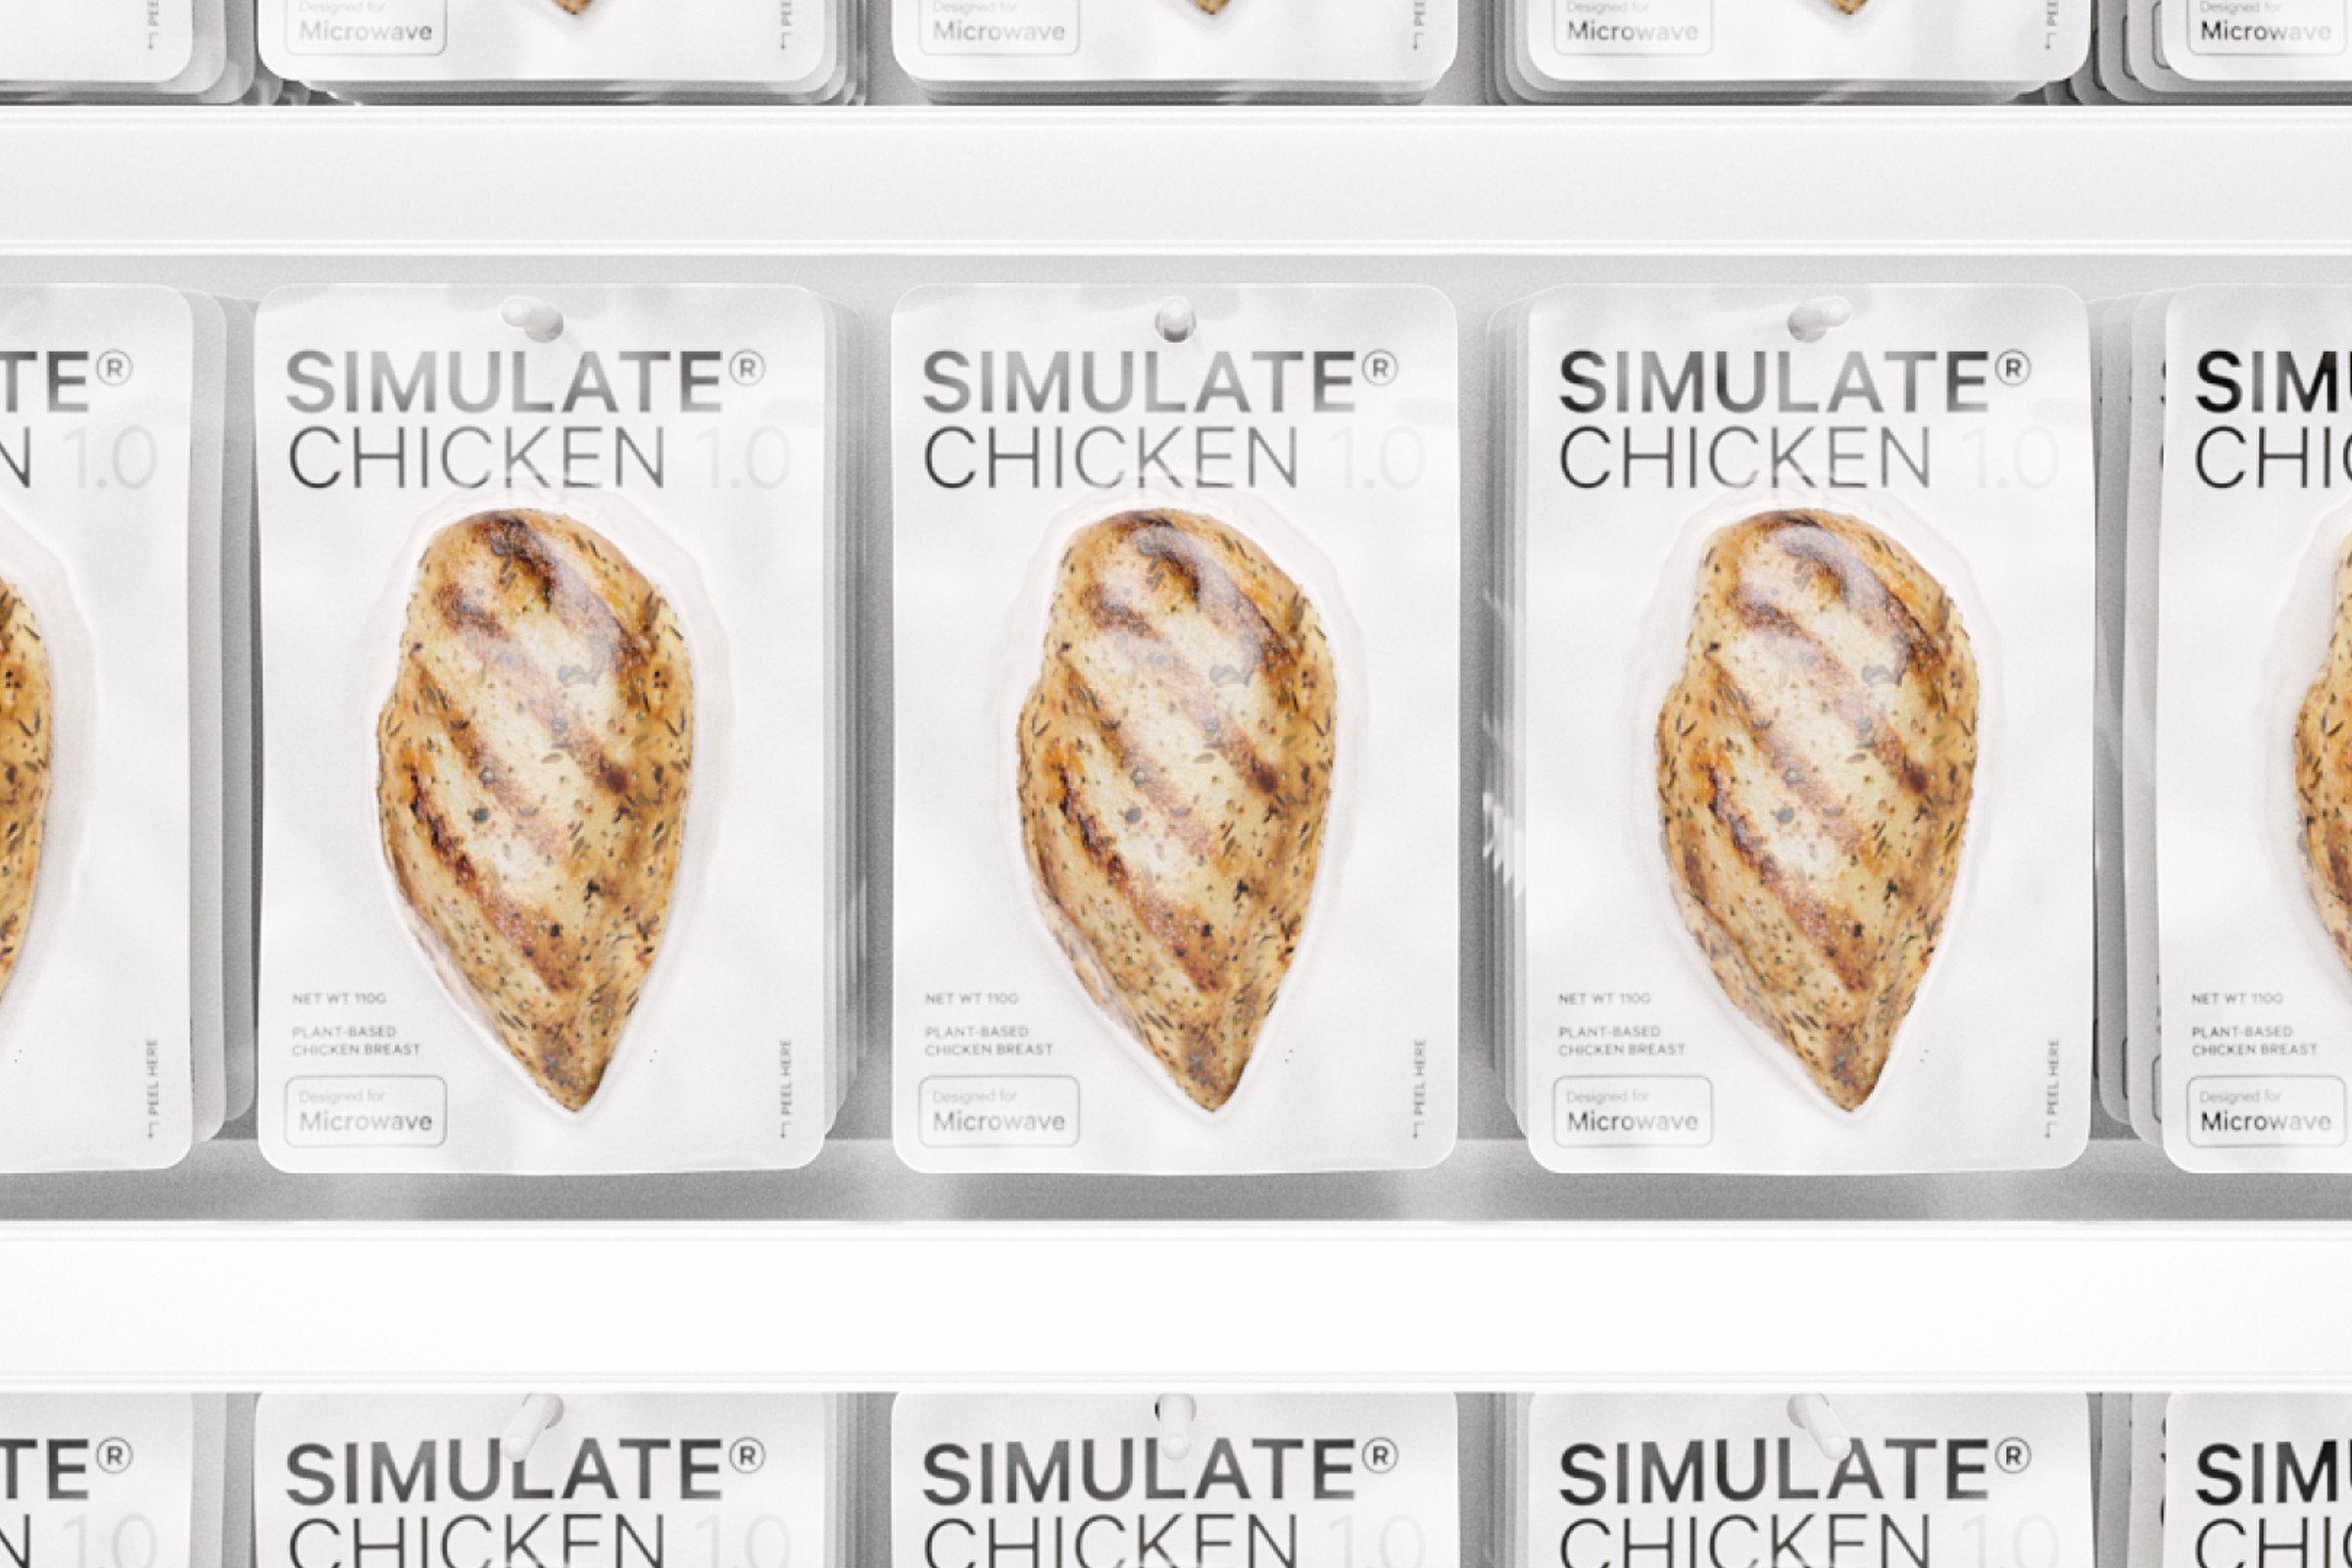 Rows of individually wrapped chicken breasts hanging on a store display